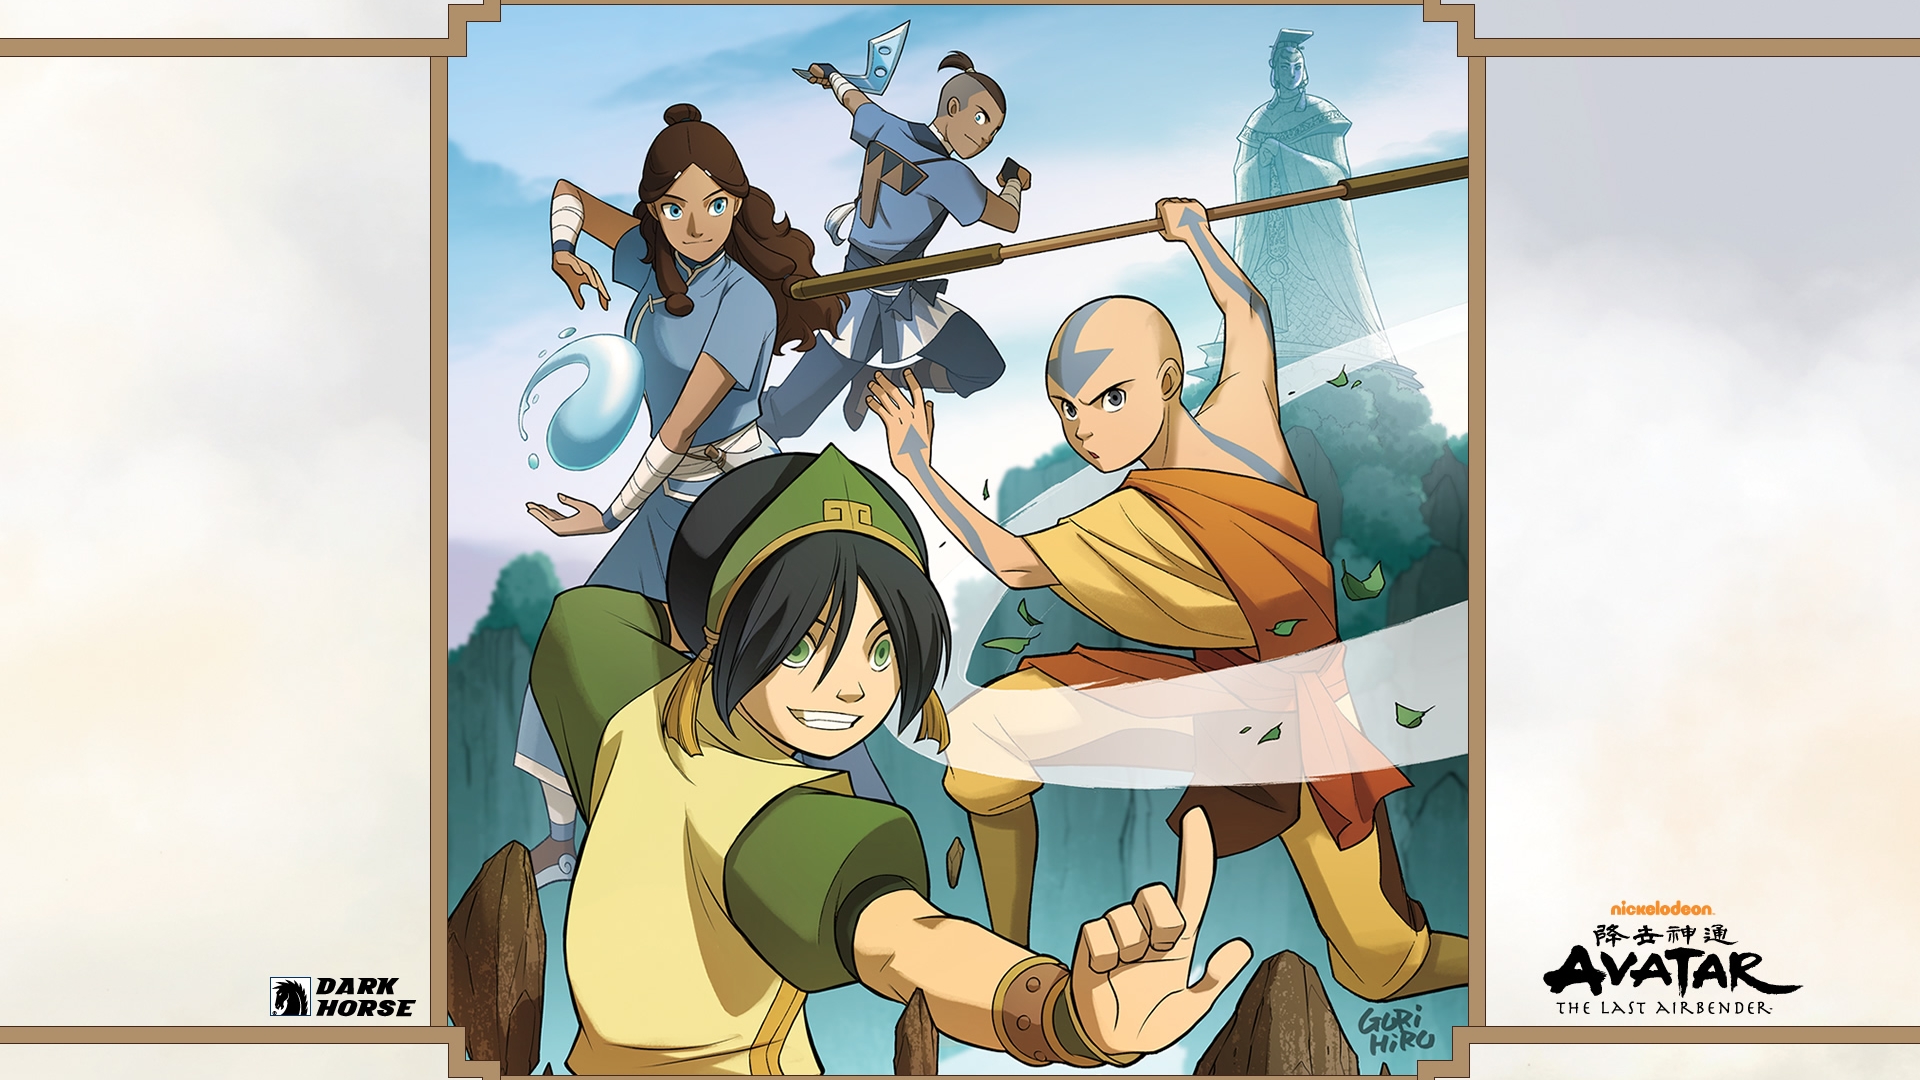 Avatar The Last Airbender Wallpaper Background Pictures Of Avatar The Last  Airbender Background Image And Wallpaper for Free Download